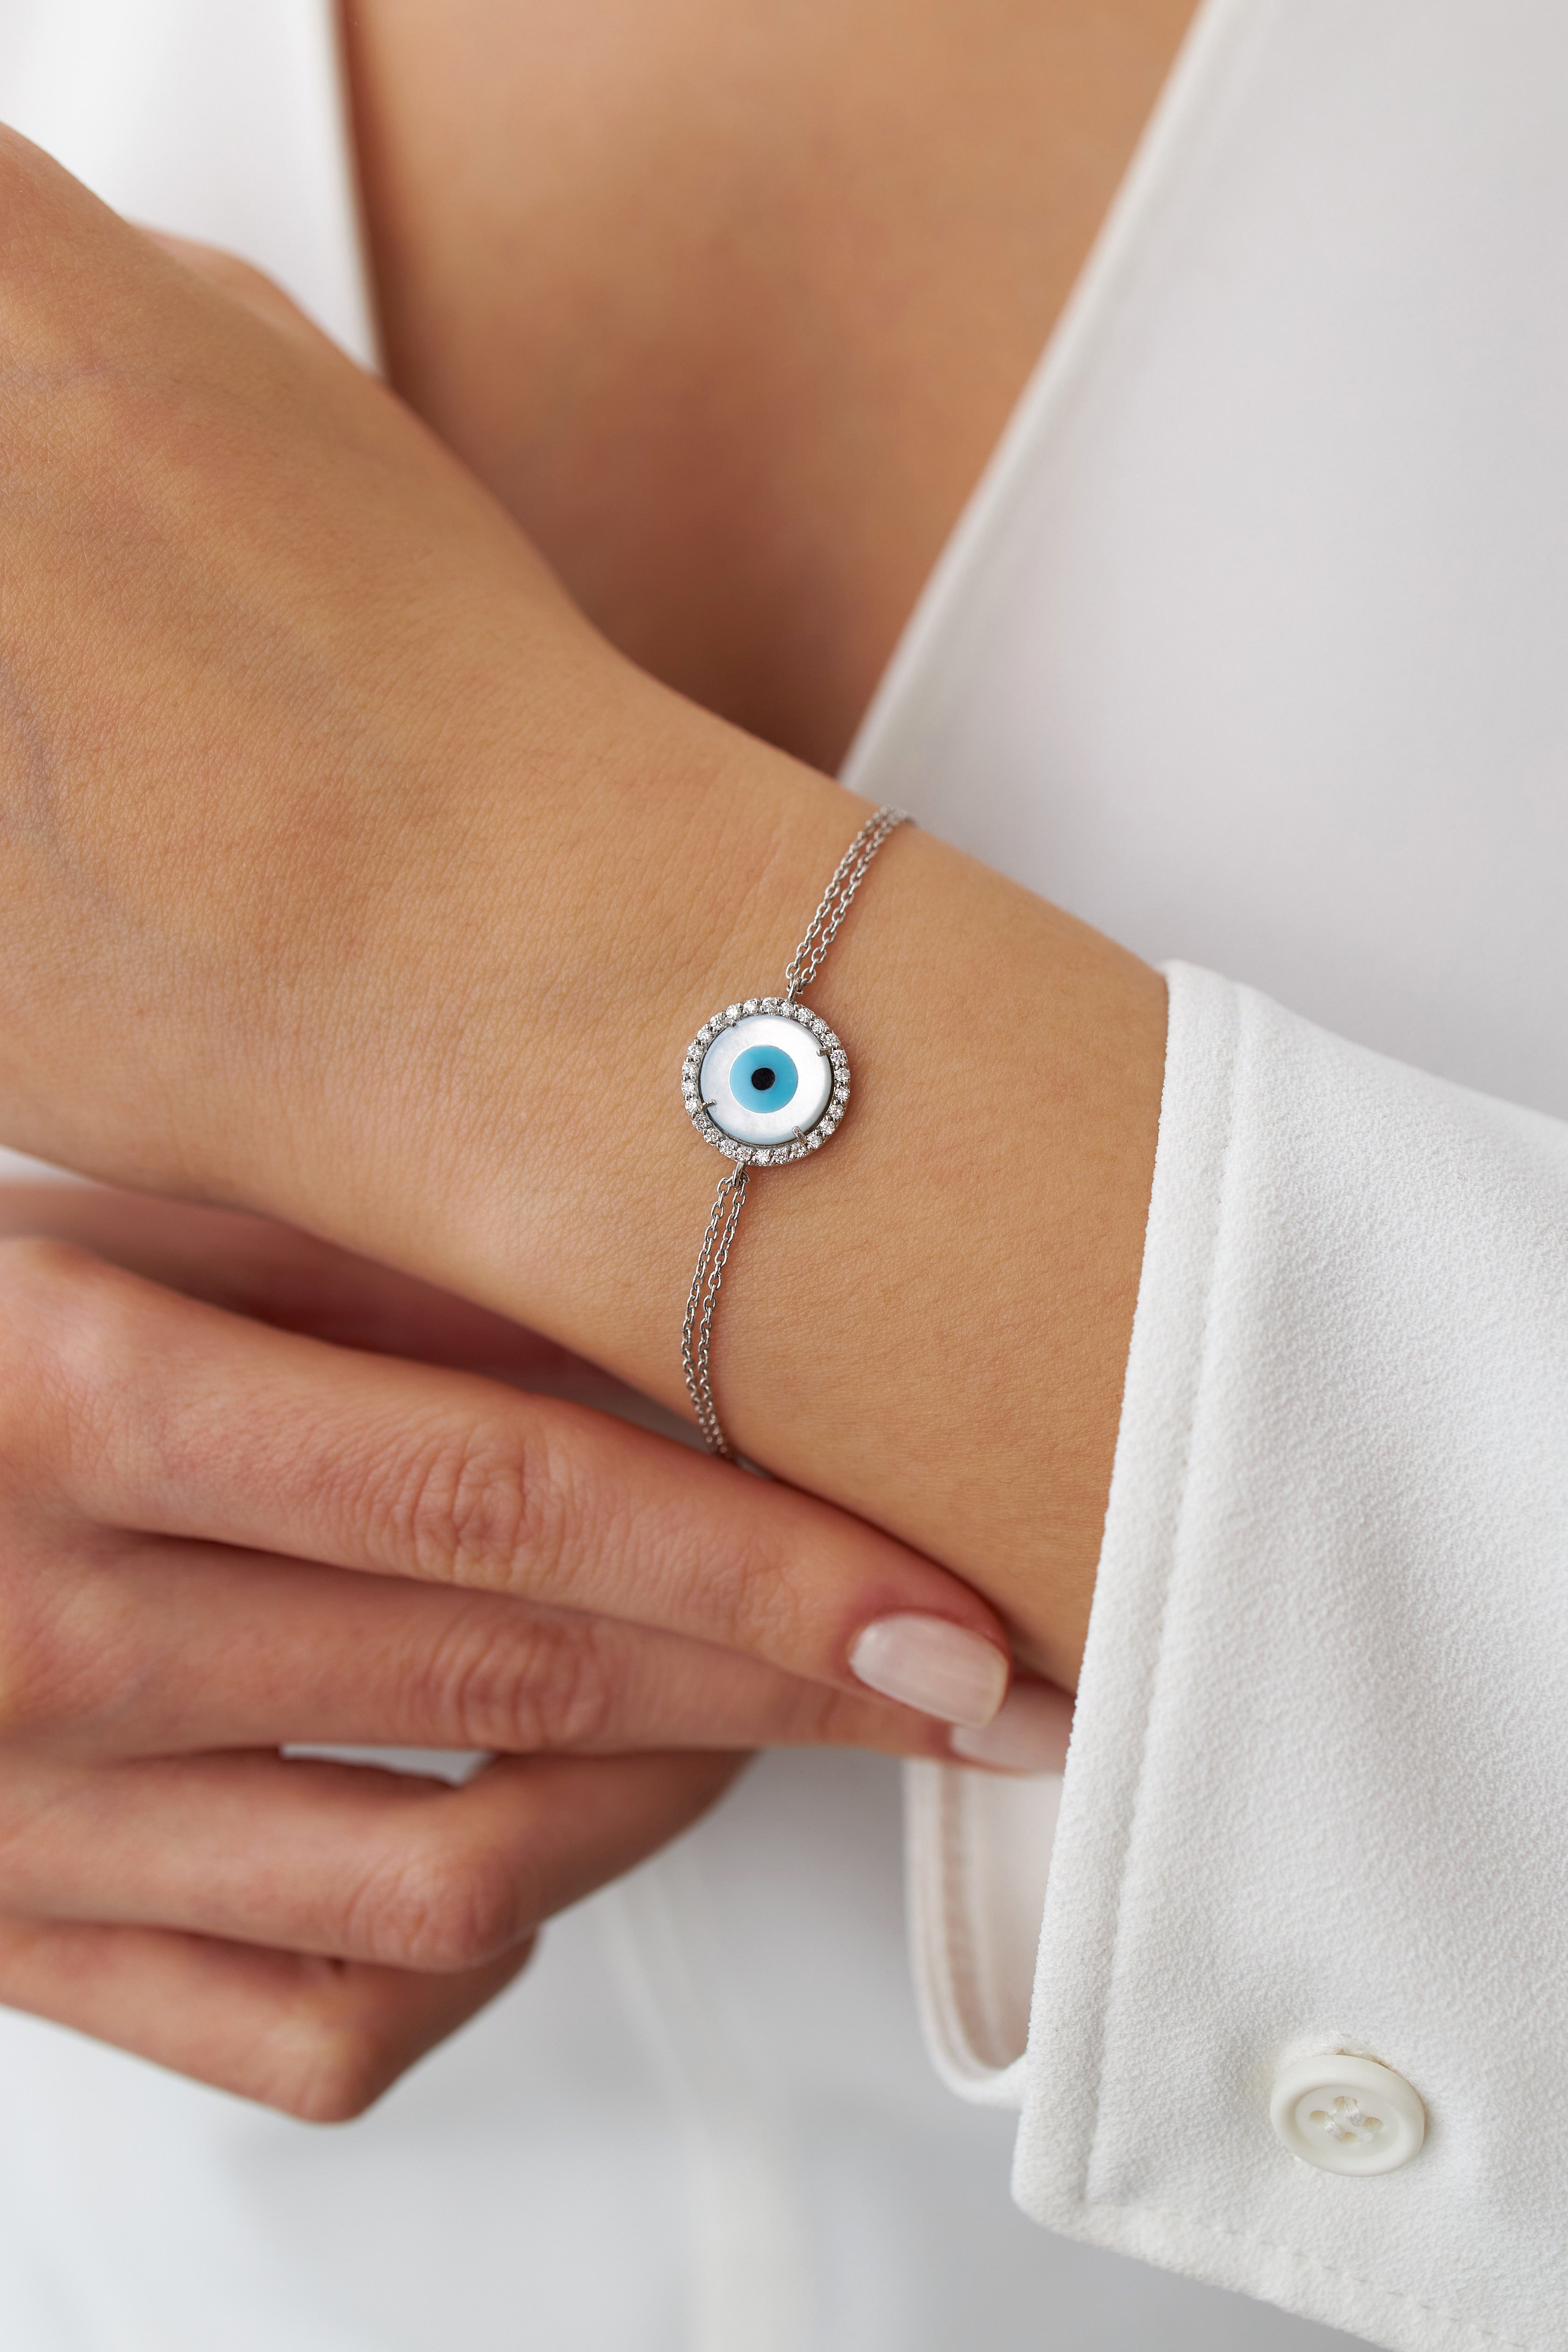 Diamond and Mother of Pearl Evil Eye Bracelet Available in 14K and 18K Gold